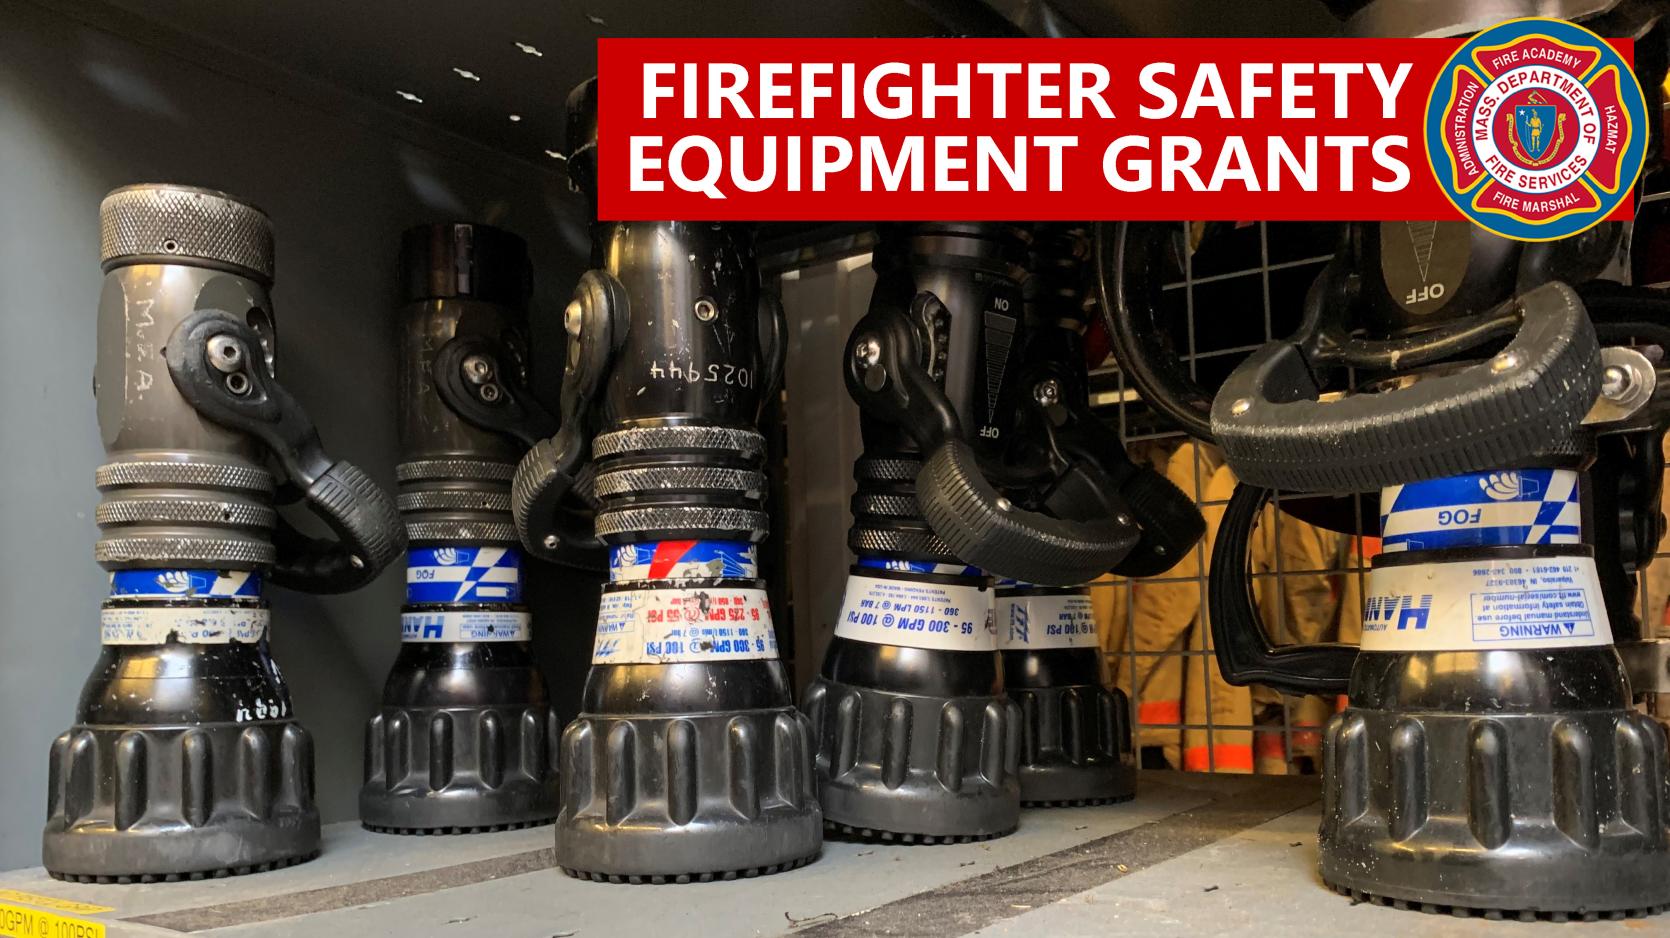 Image of firehose nozzles